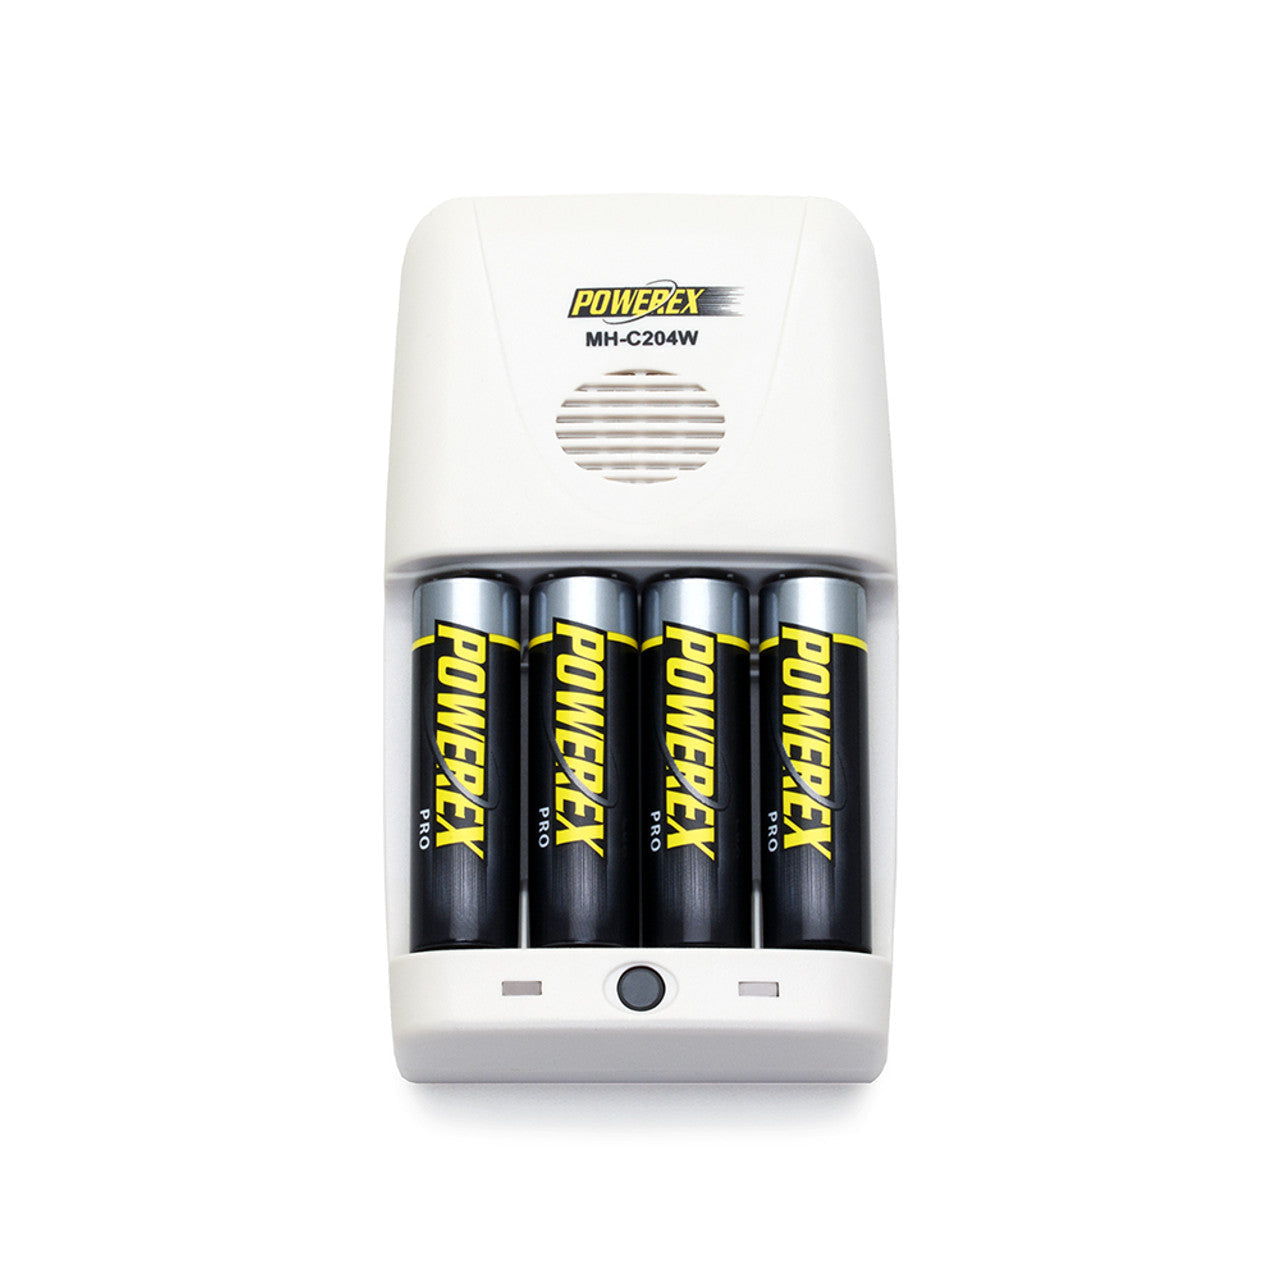 Batteries & Chargers - Maha PowerEx MH-C204W 1-Hour Conditioning AA/AAA Battery Charger